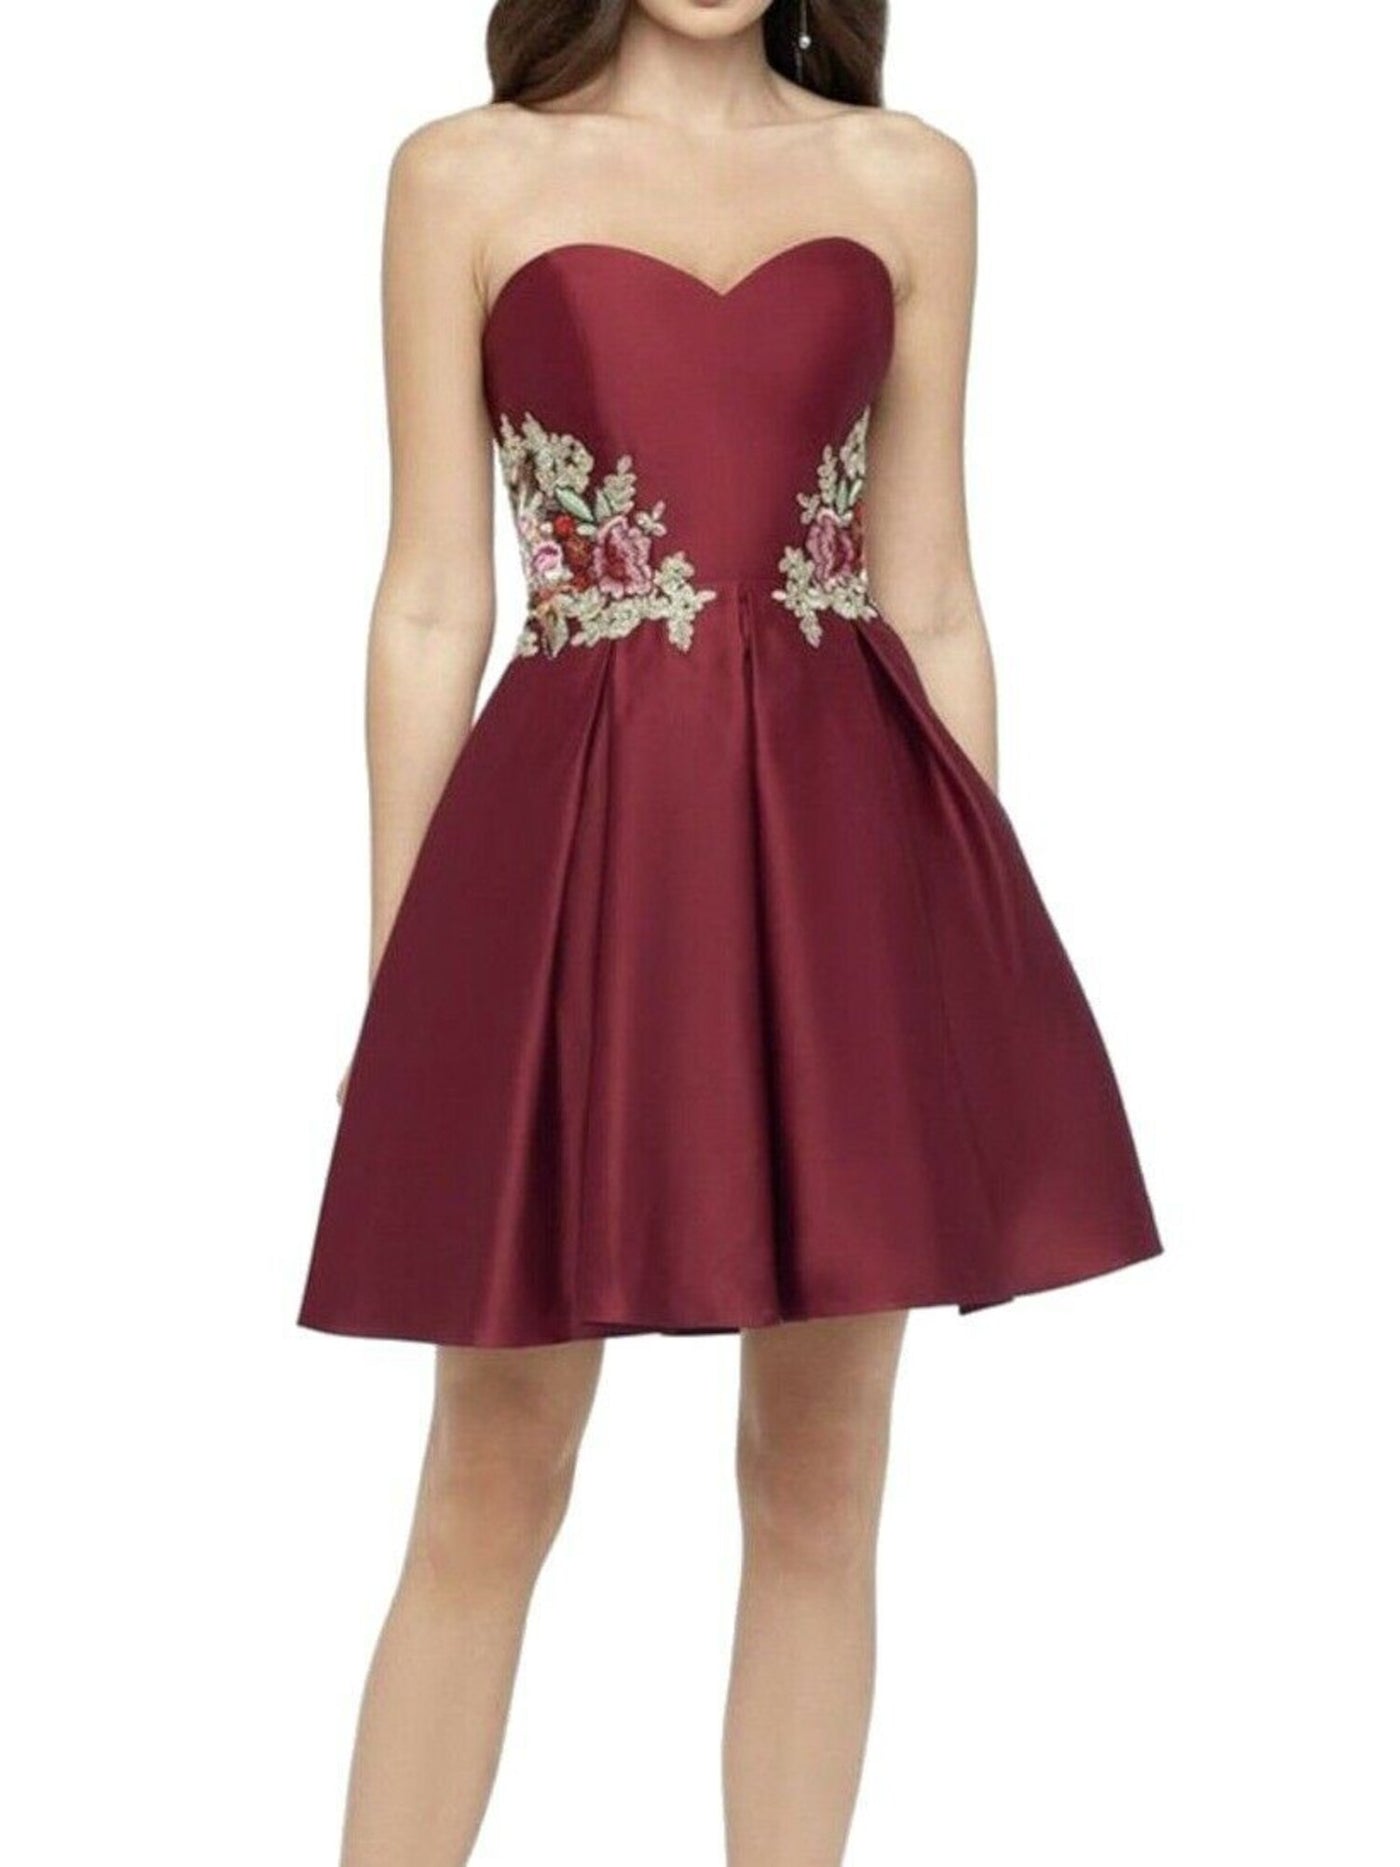 BLONDIE Womens Burgundy Above The Knee Fit + Flare Party Dress Juniors 9